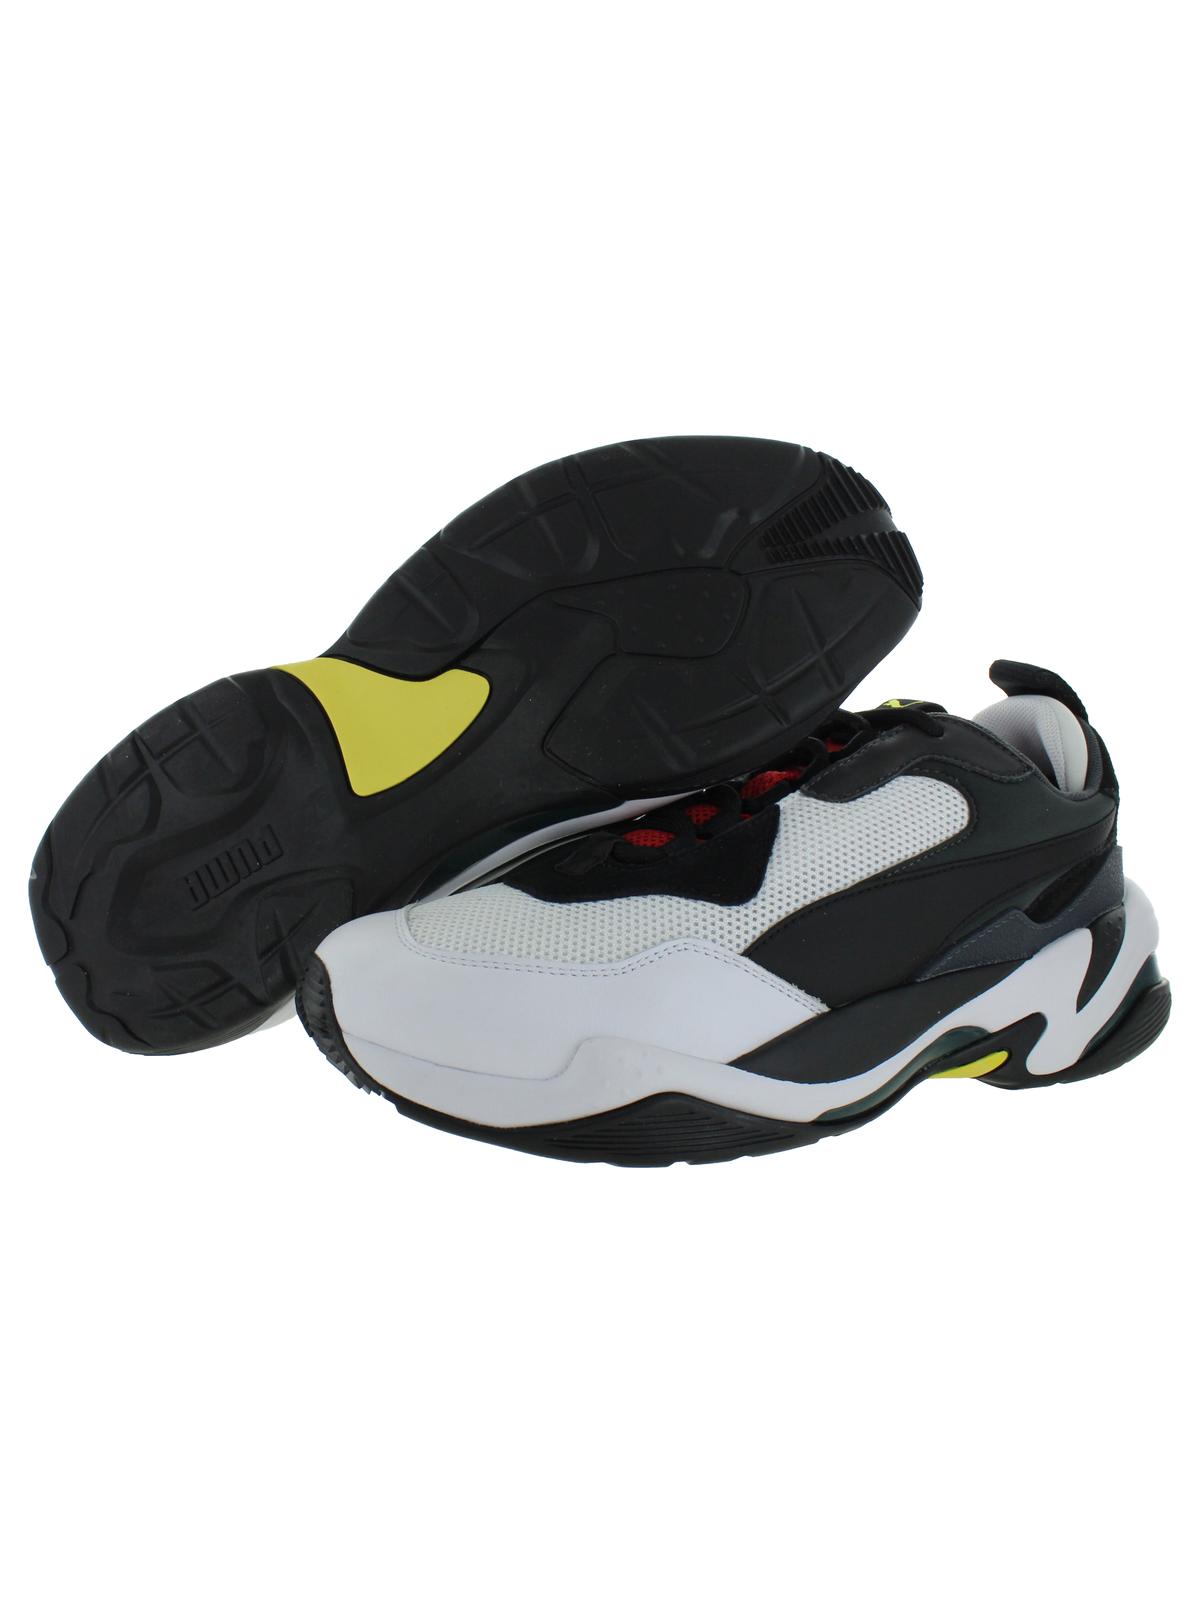 Puma Mens Thunder Spectra Leather Casual Running, Cross Training Shoes - image 3 of 3